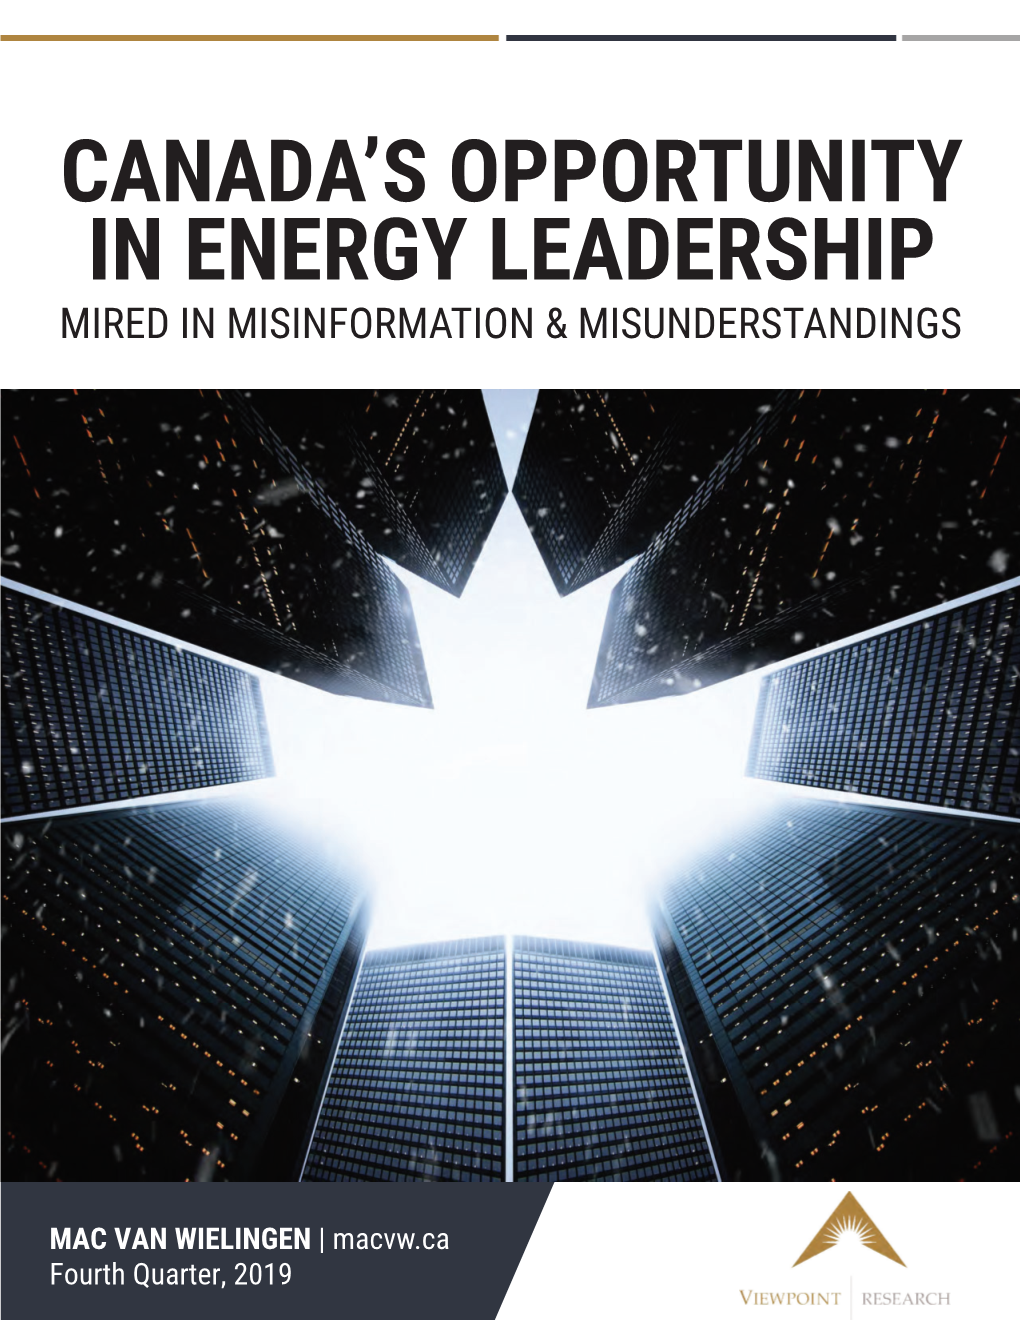 Canada's Opportunity in Energy Leadership